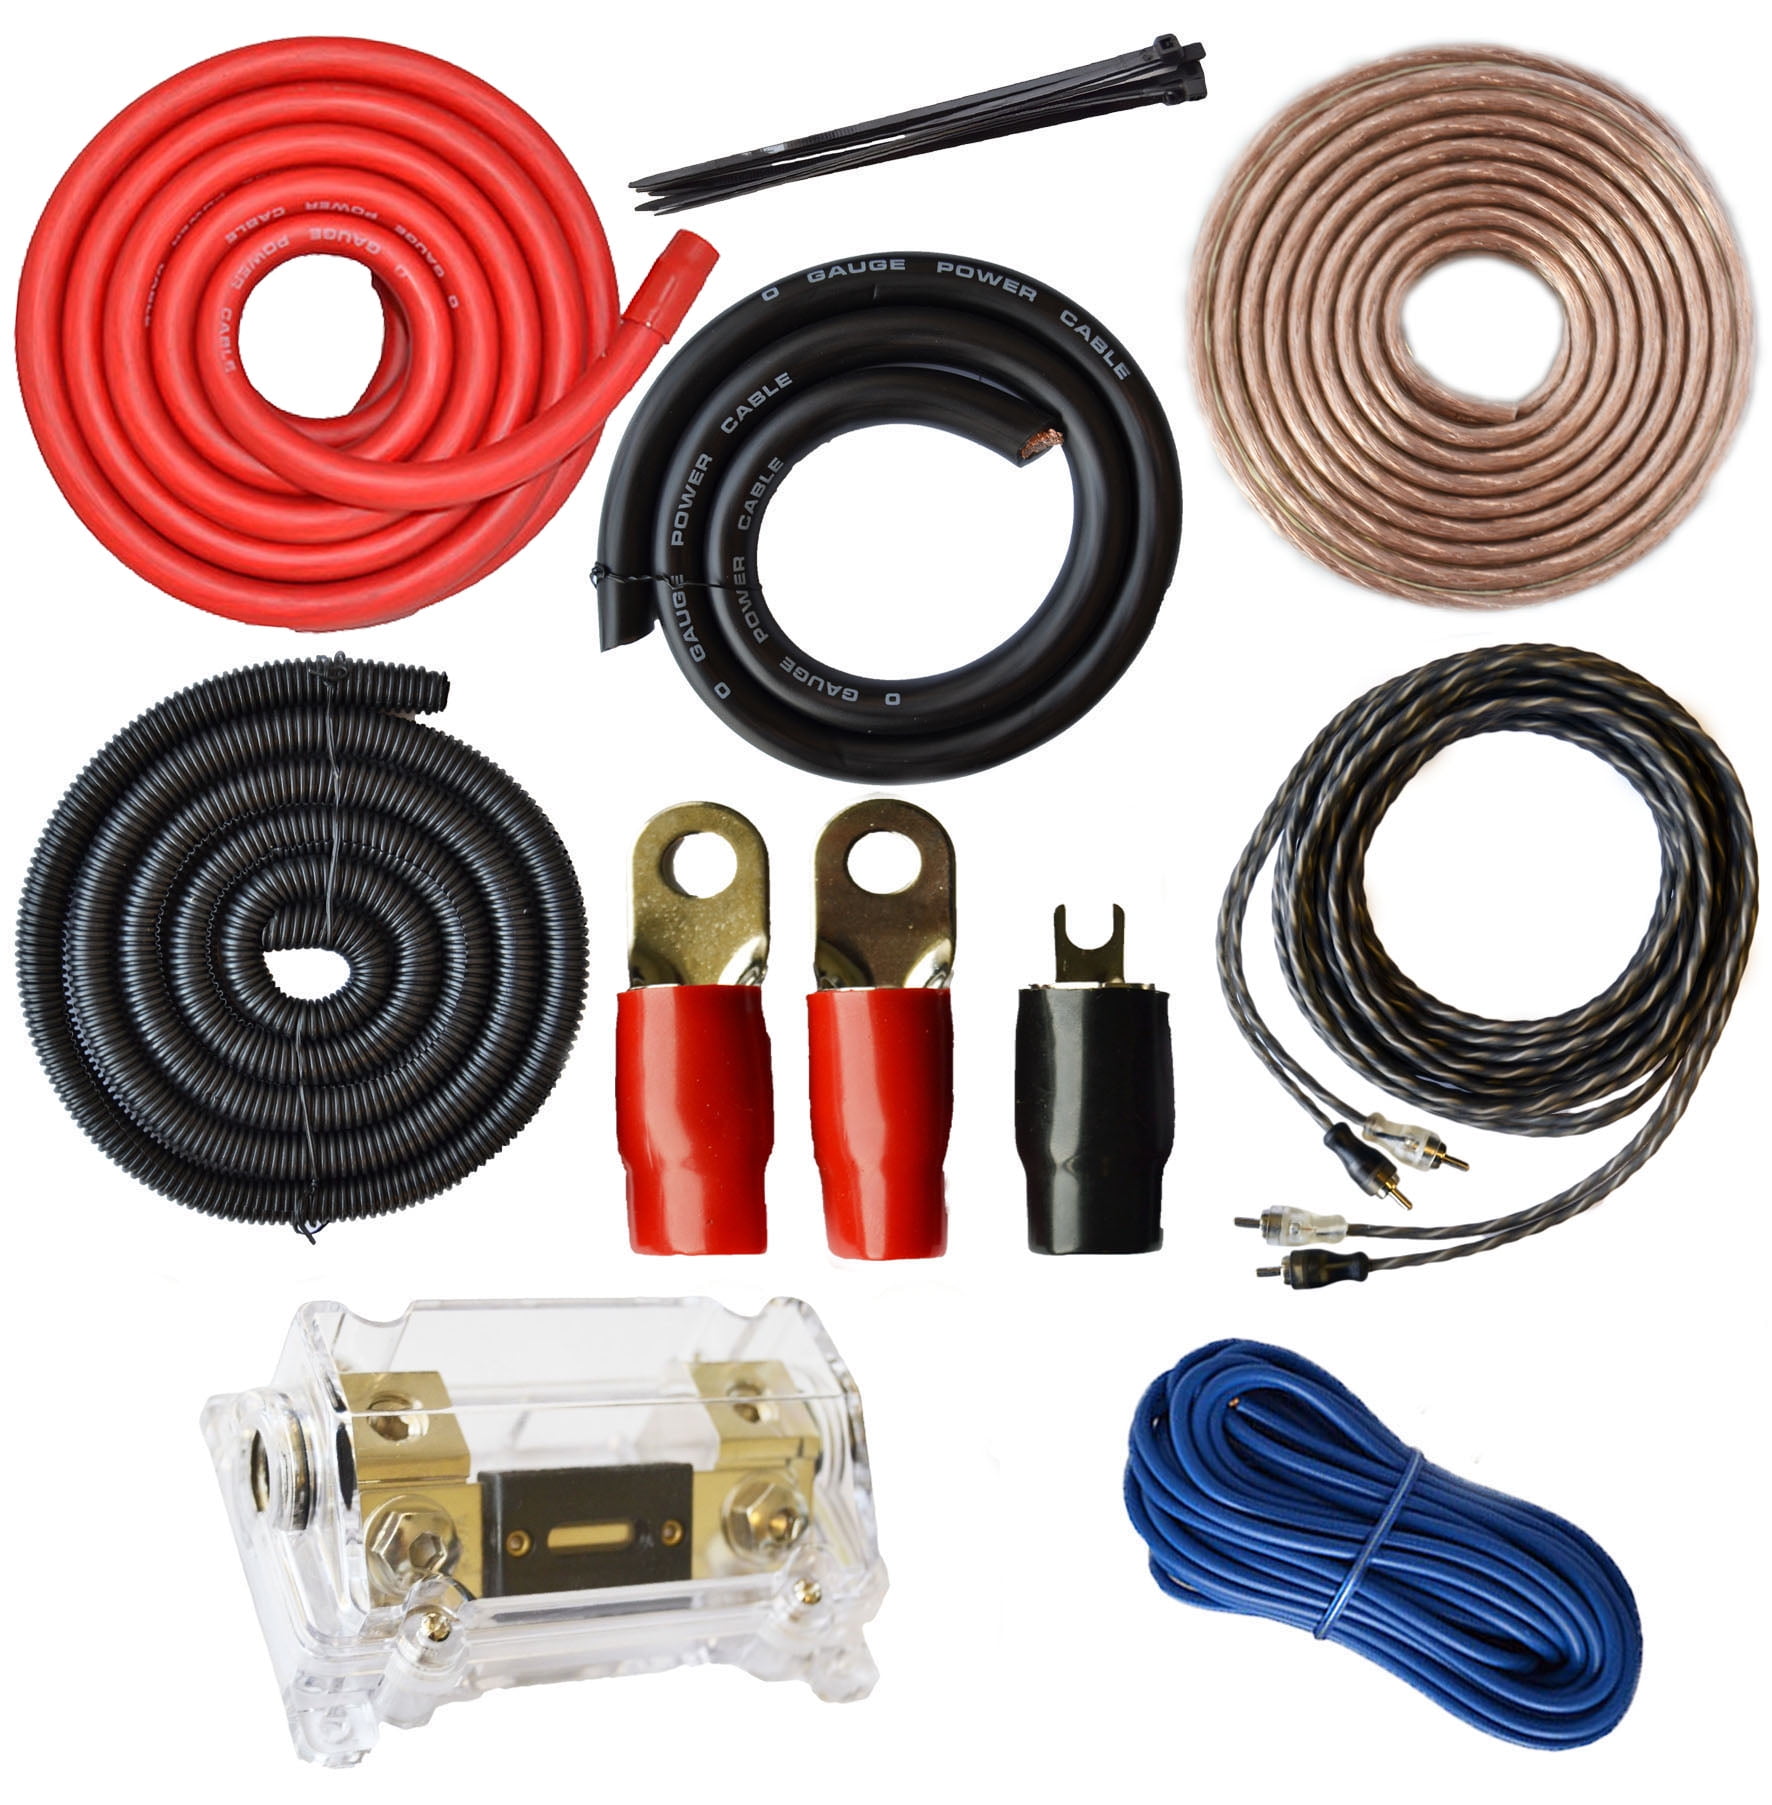 Free Same Day Priority Shipping! DNF 0 Gauge Red Complete Audio Kit Complete Amplifier Amp Installation Kit 6000W 